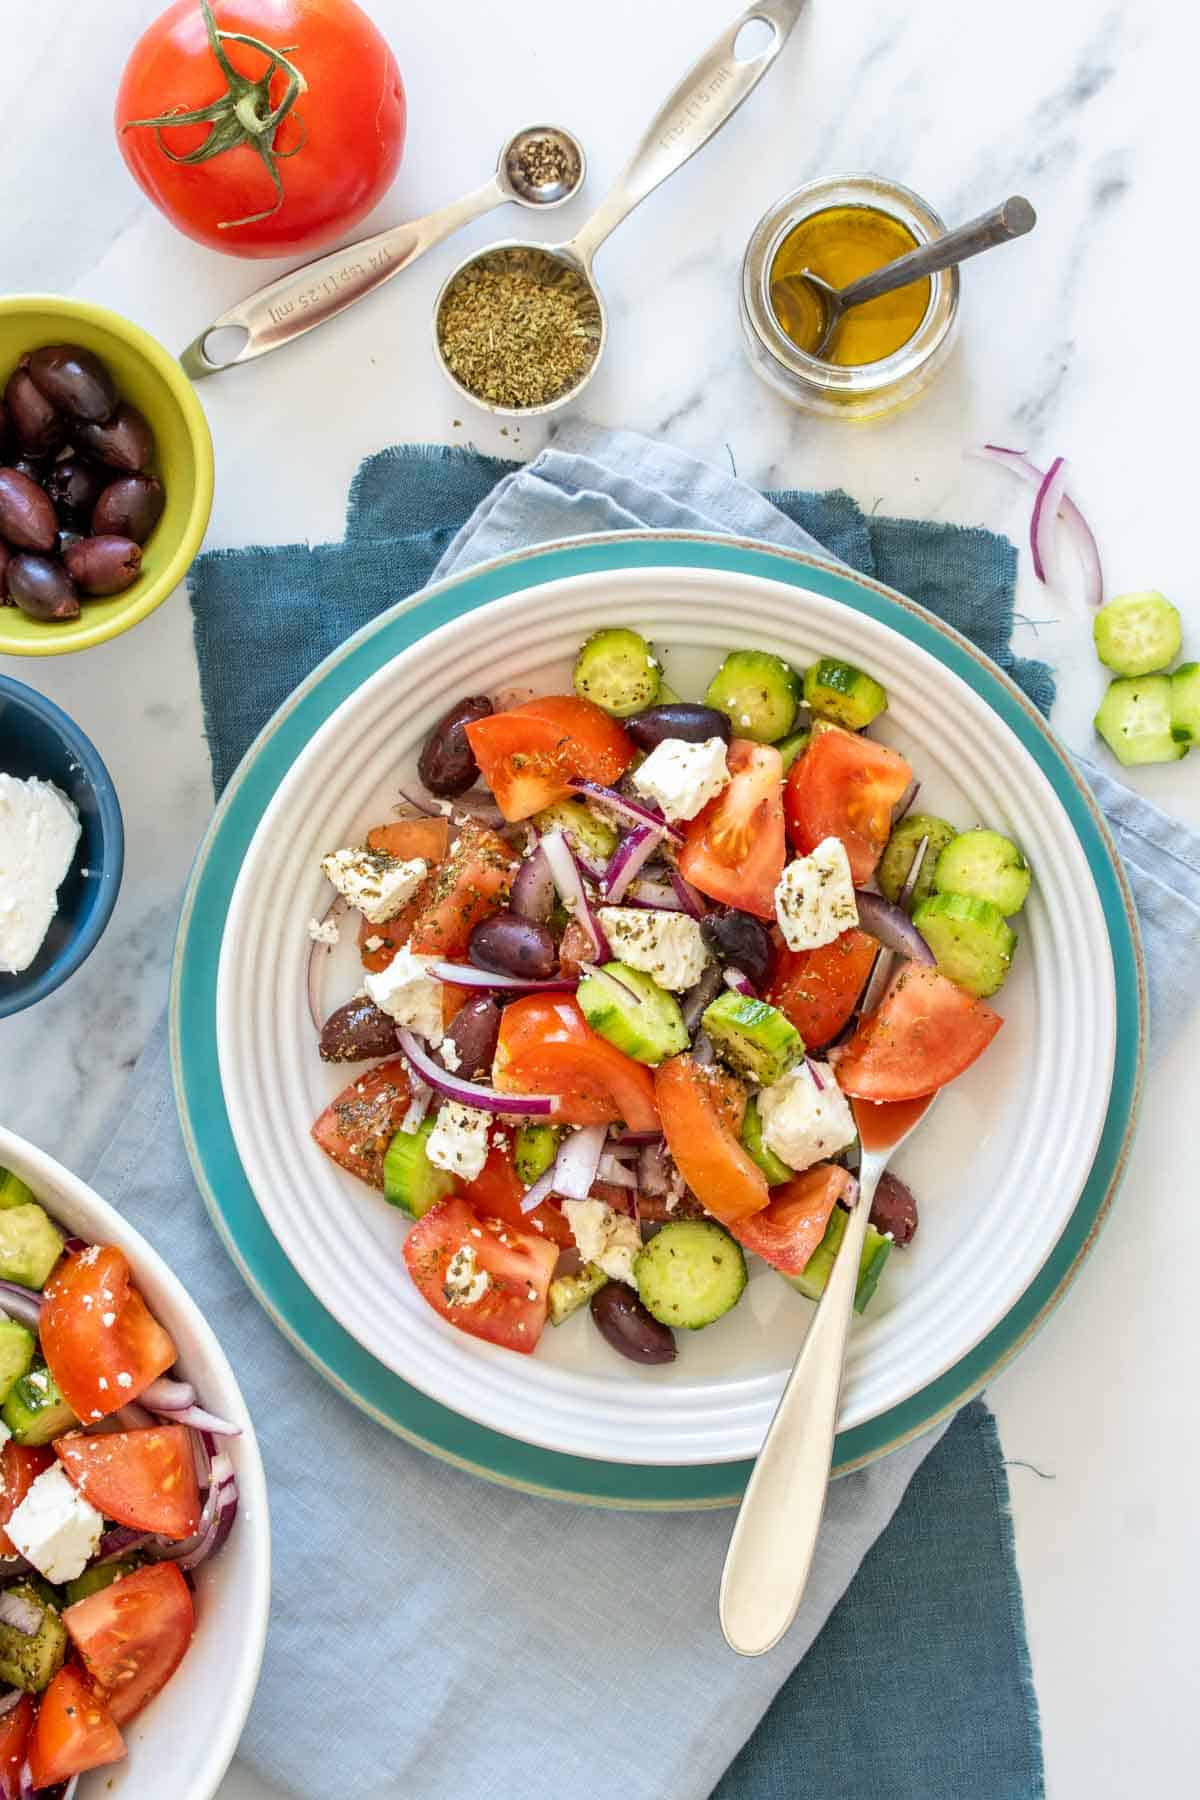 A white bowl on a turquoise plate with a Greek salad in it surrounded by the ingredients